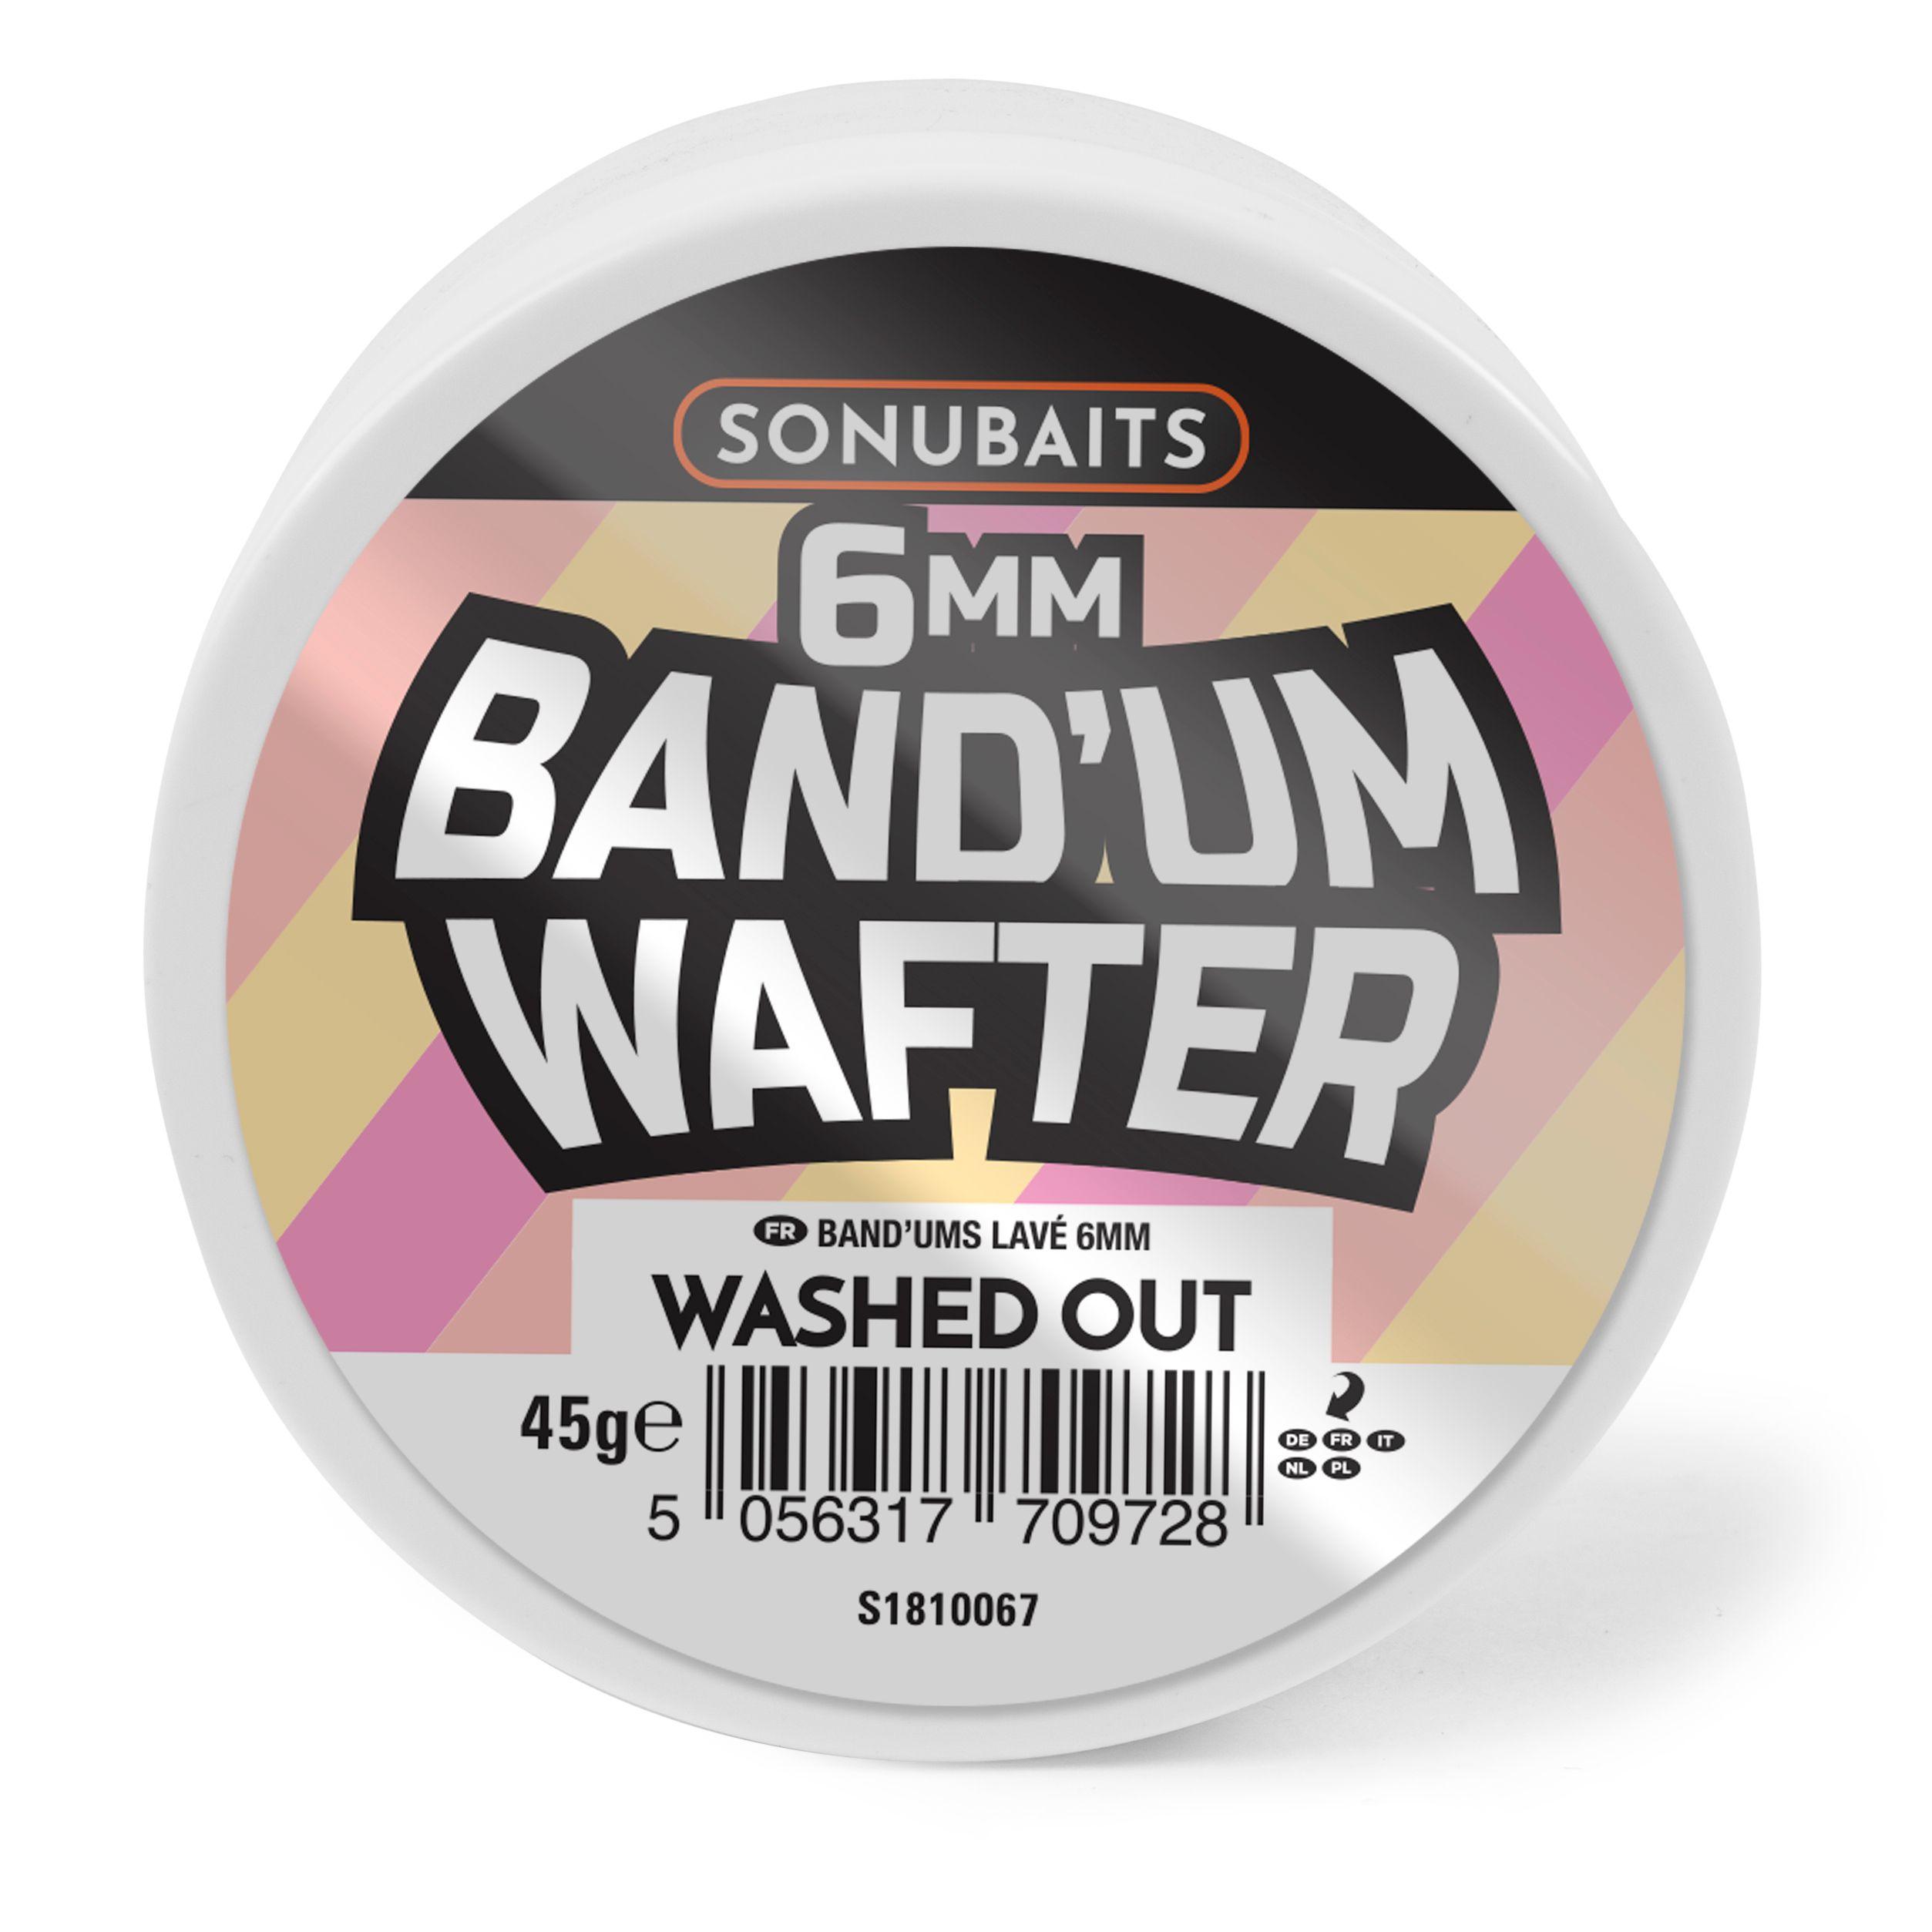 Sonubaits Band'um Wafters 6mm - Washed Out